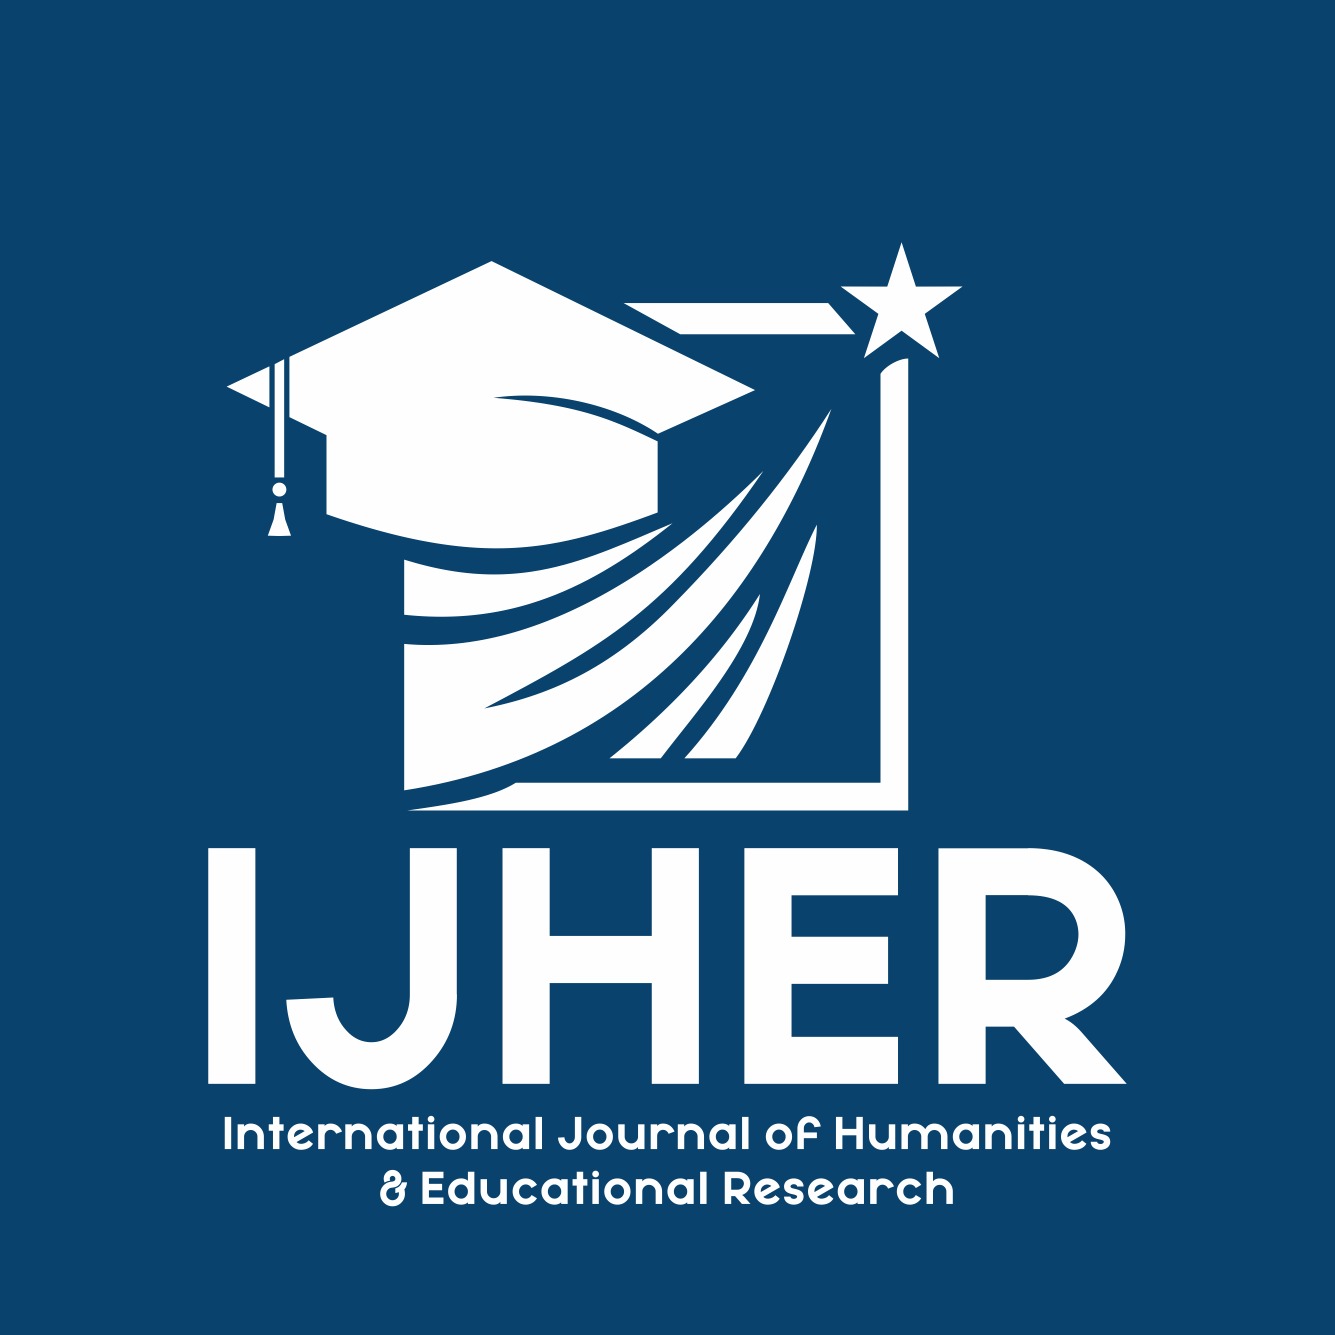 International Journal of Humanities and Educational Research